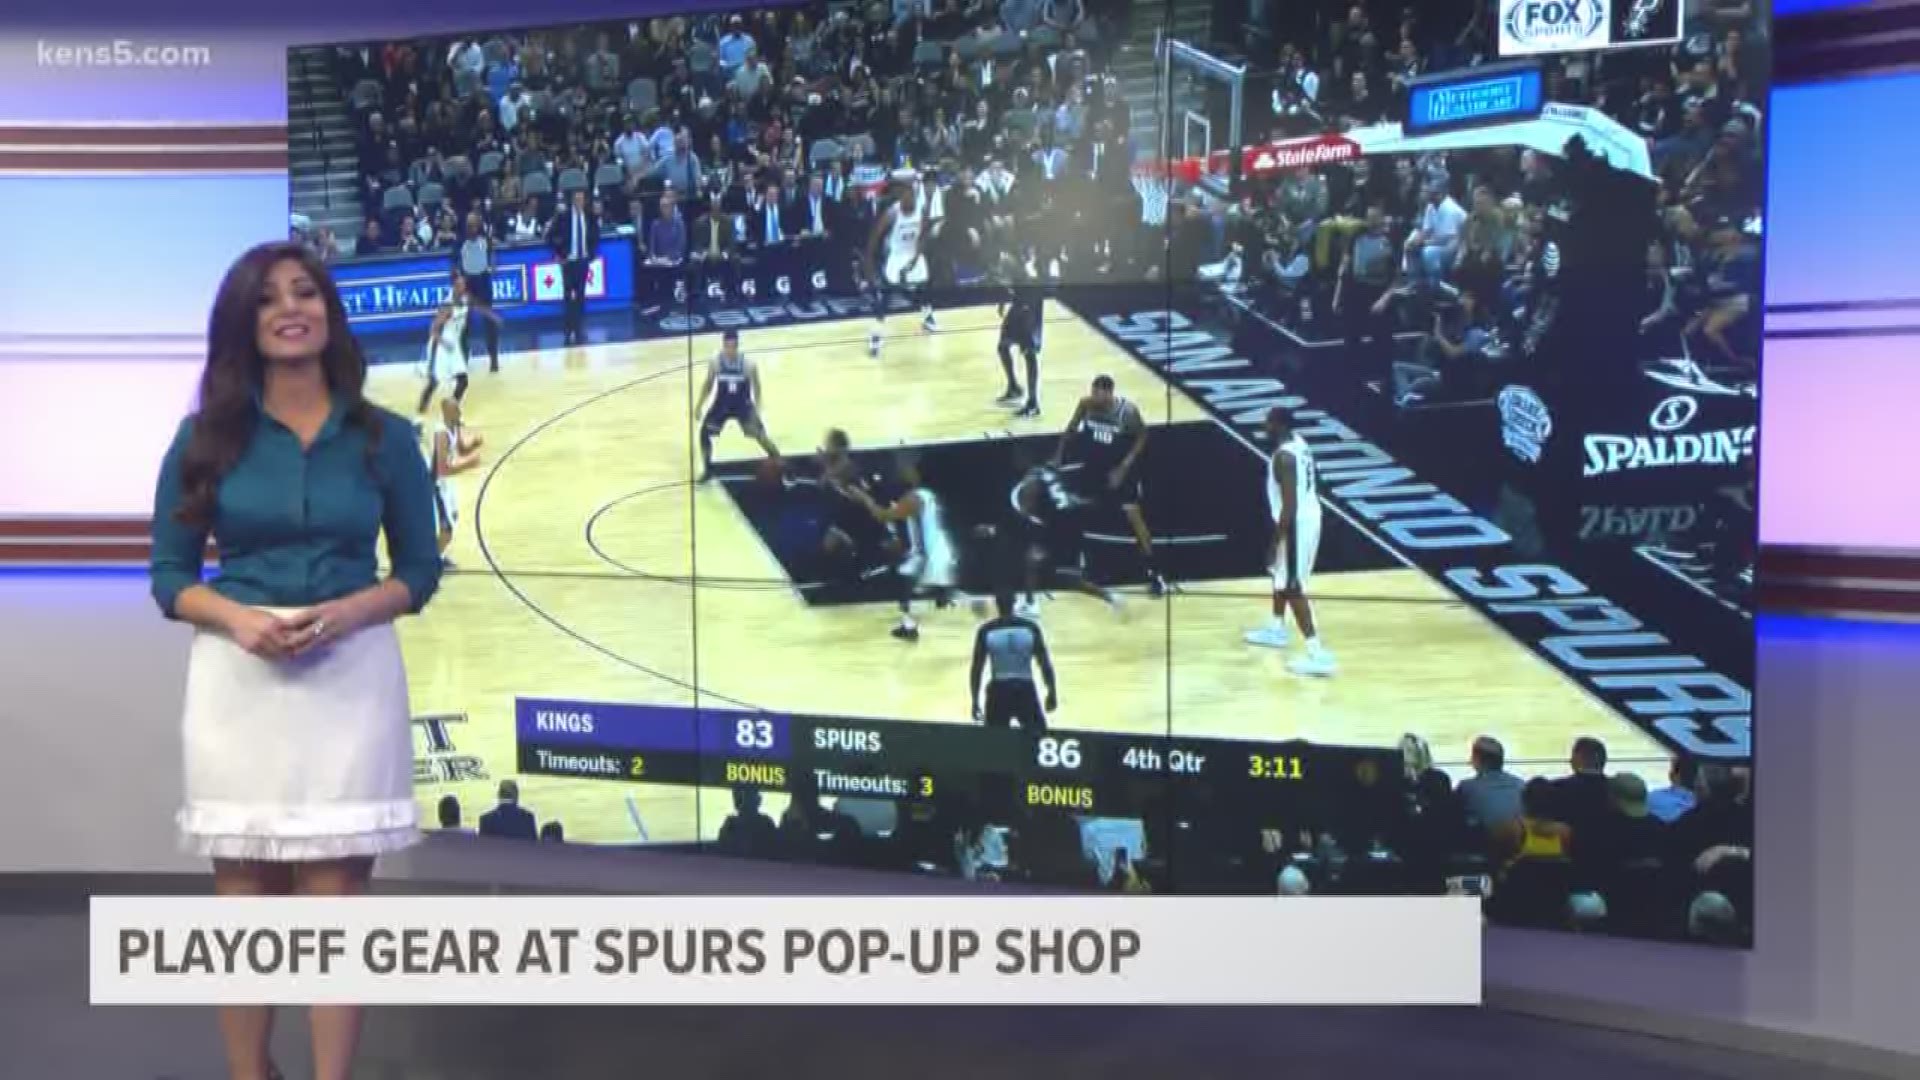 Spurs fans can now get their gear at a new "Pop-Up" shop.